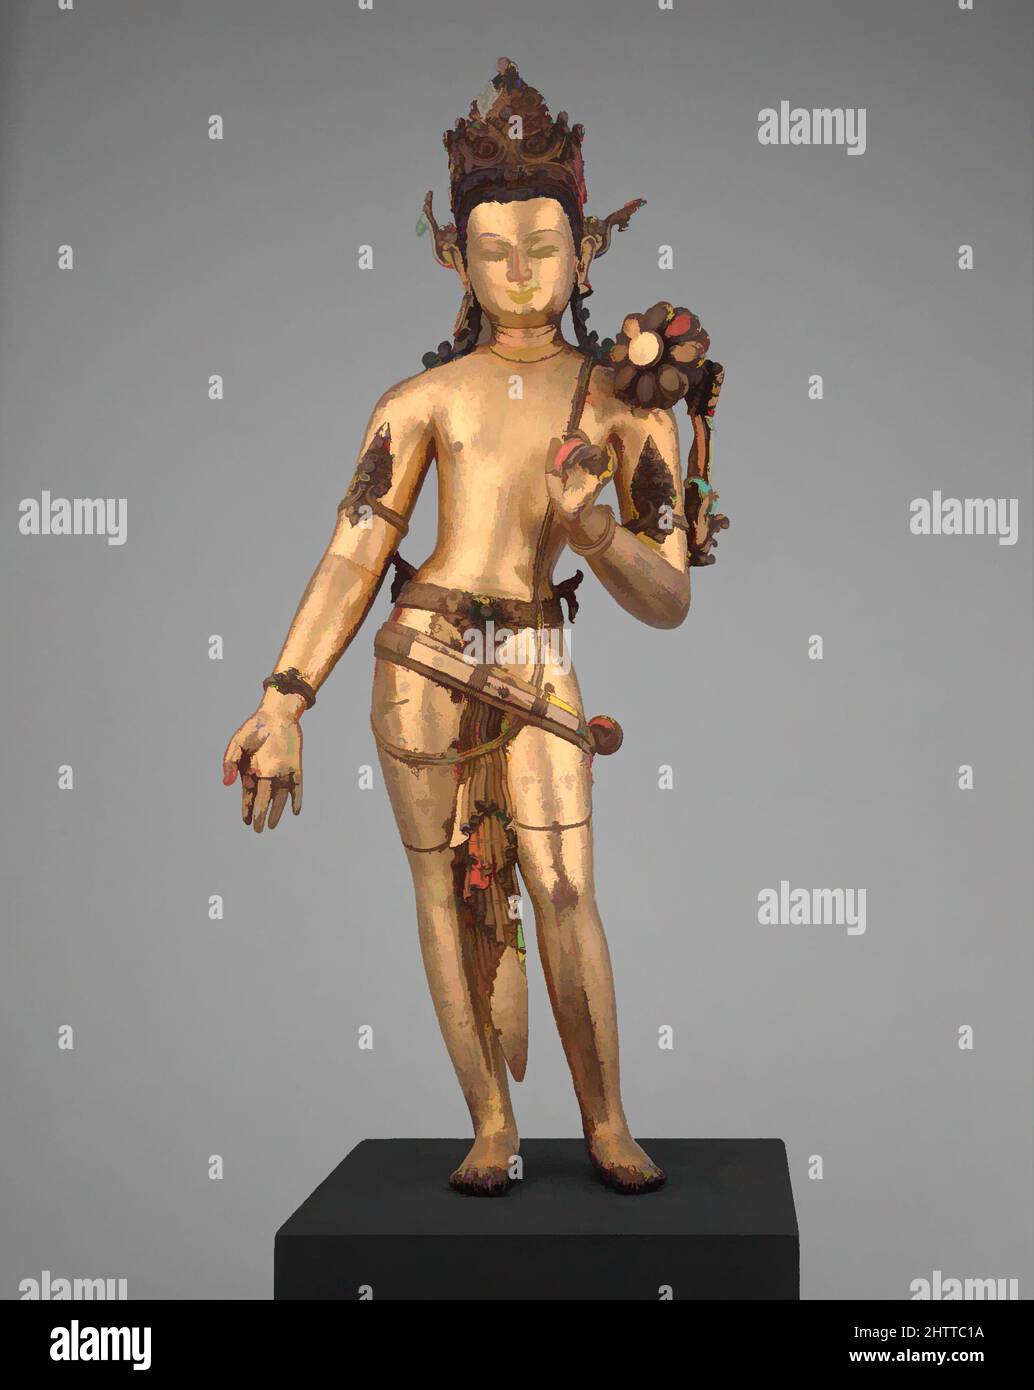 Art inspired by The Bodhisattva Padmapani Lokeshvara, Transitional period, 11th century, Nepal (Kathmandu Valley), Copper alloy with gilding and semiprecious stones, H. 23 in. (58.4 cm); W. 10 1/2 in. (25.7 cm); D. 4 3/4 in. (12.1 cm), Sculpture, Maitreya, the messianic bodhisattva, Classic works modernized by Artotop with a splash of modernity. Shapes, color and value, eye-catching visual impact on art. Emotions through freedom of artworks in a contemporary way. A timeless message pursuing a wildly creative new direction. Artists turning to the digital medium and creating the Artotop NFT Stock Photo